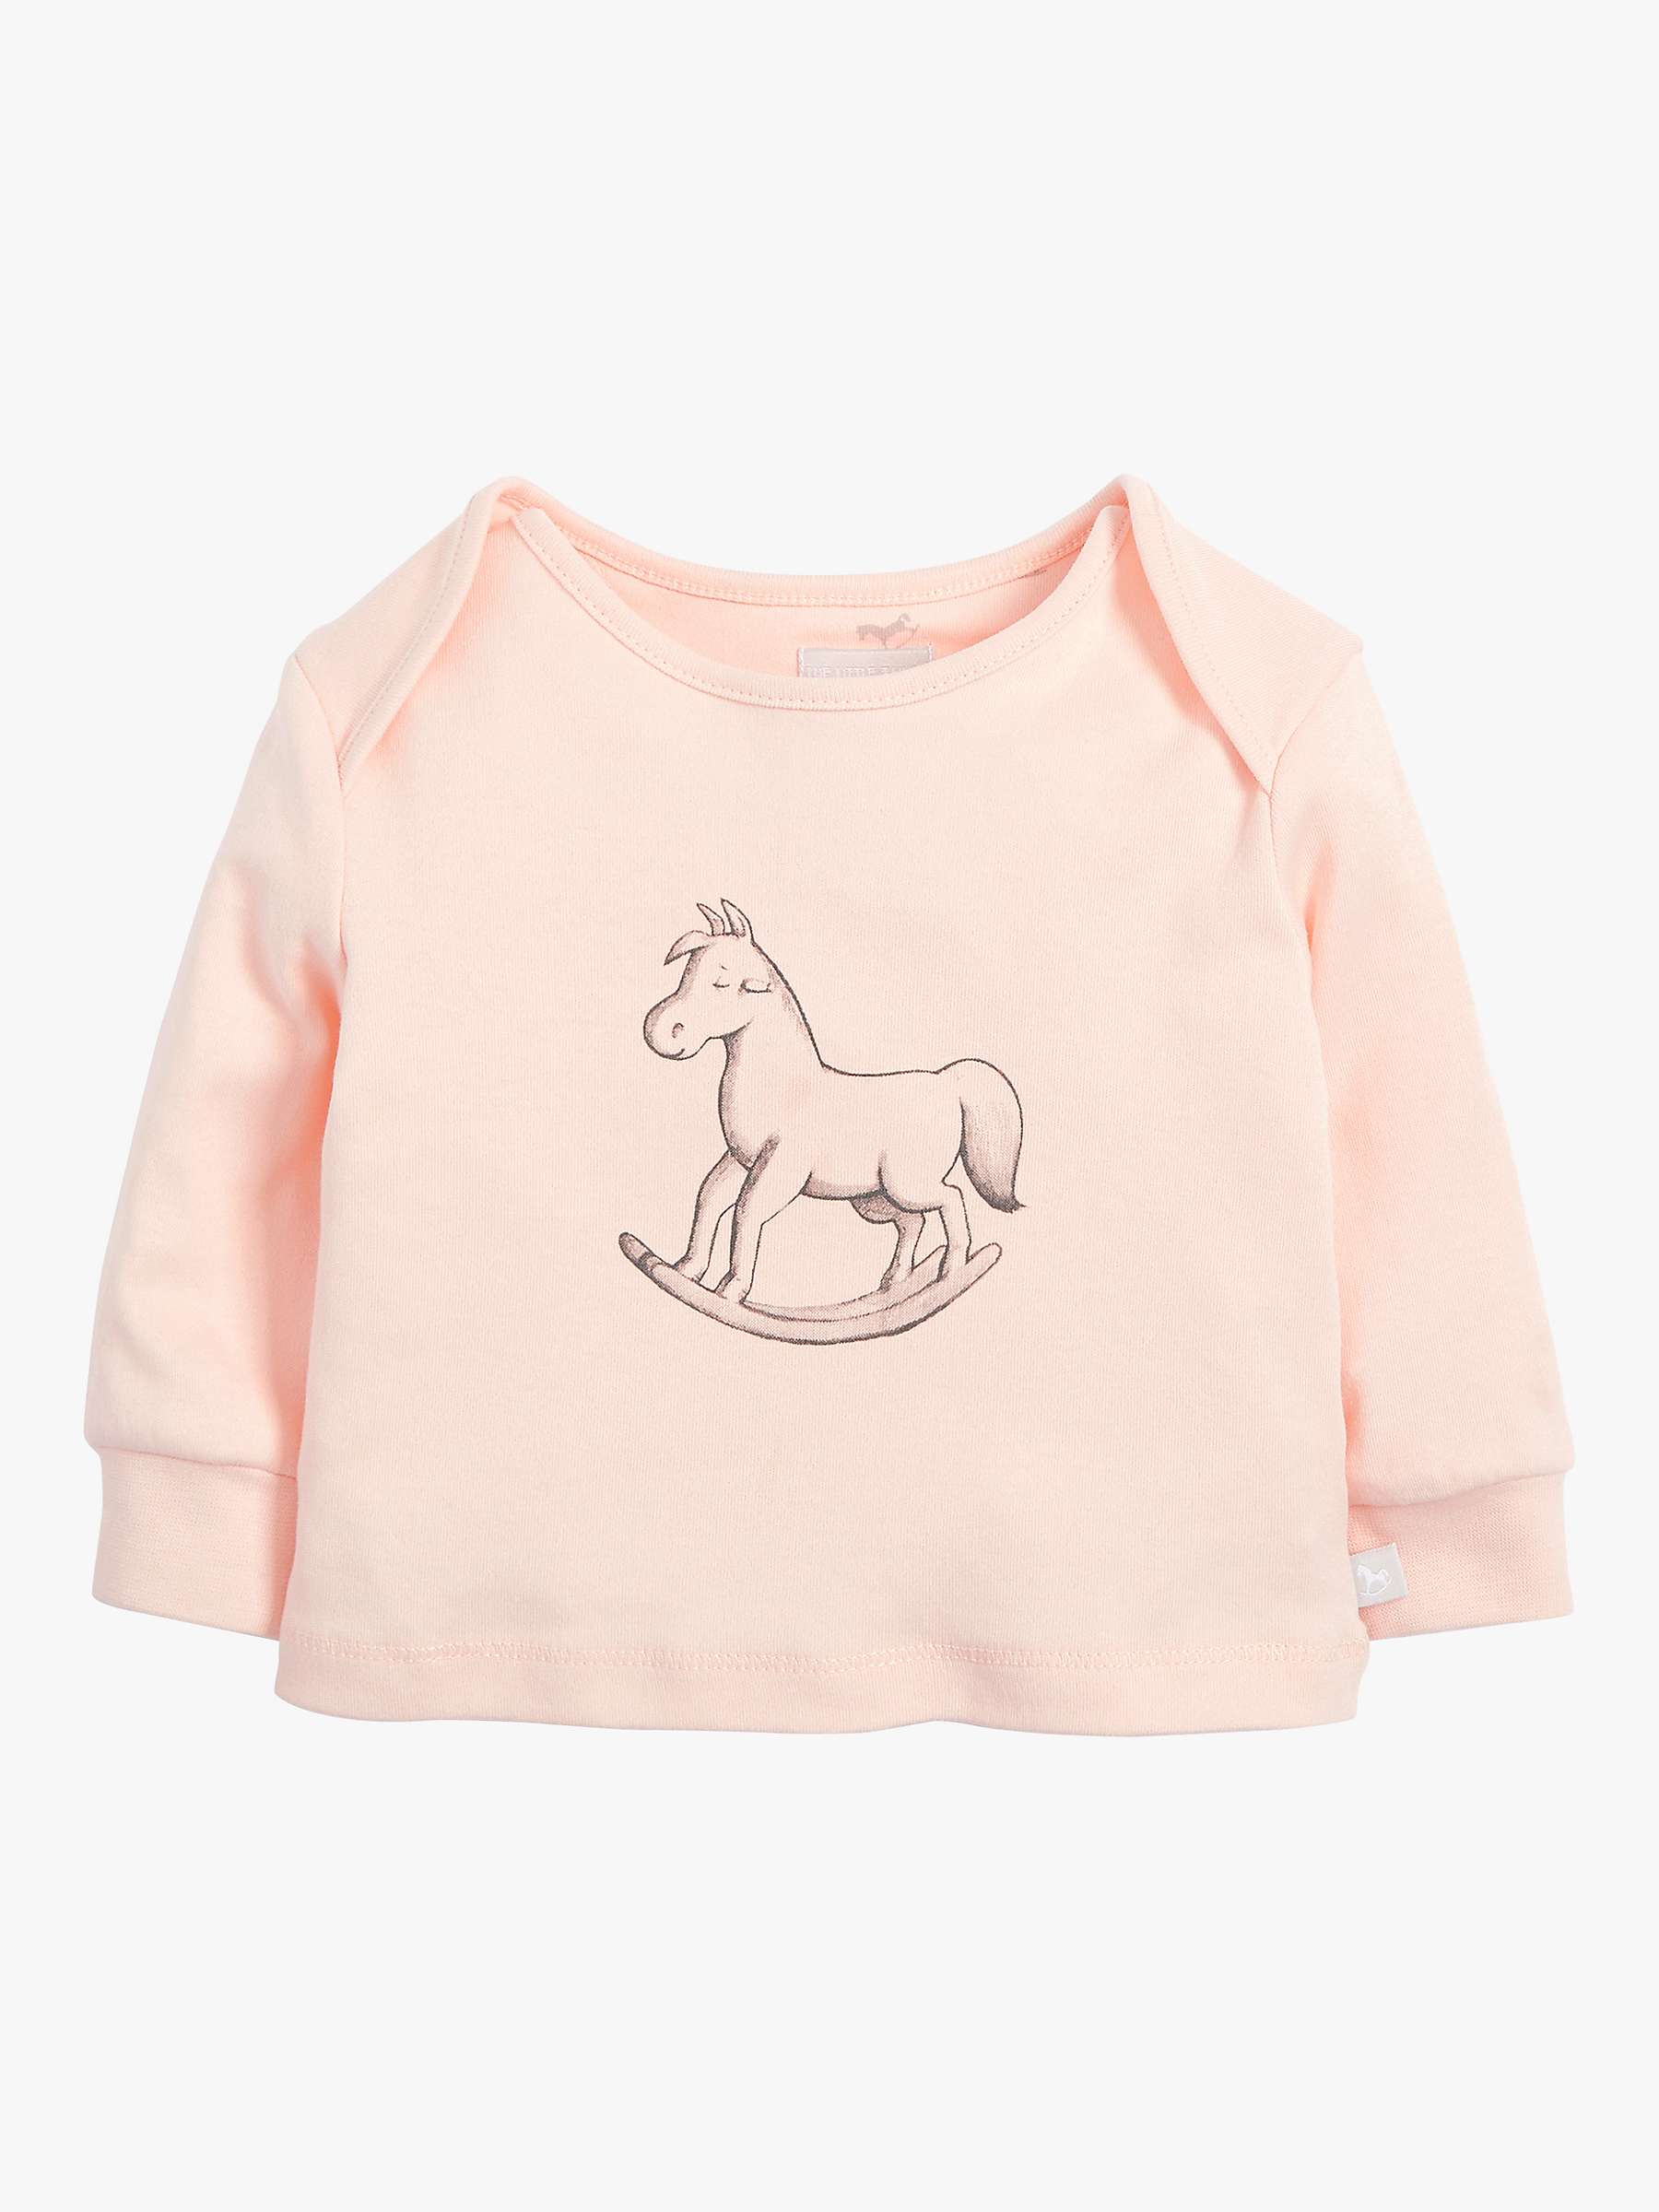 Buy The Little Tailor Baby Cotton Top and Bottom Set Online at johnlewis.com